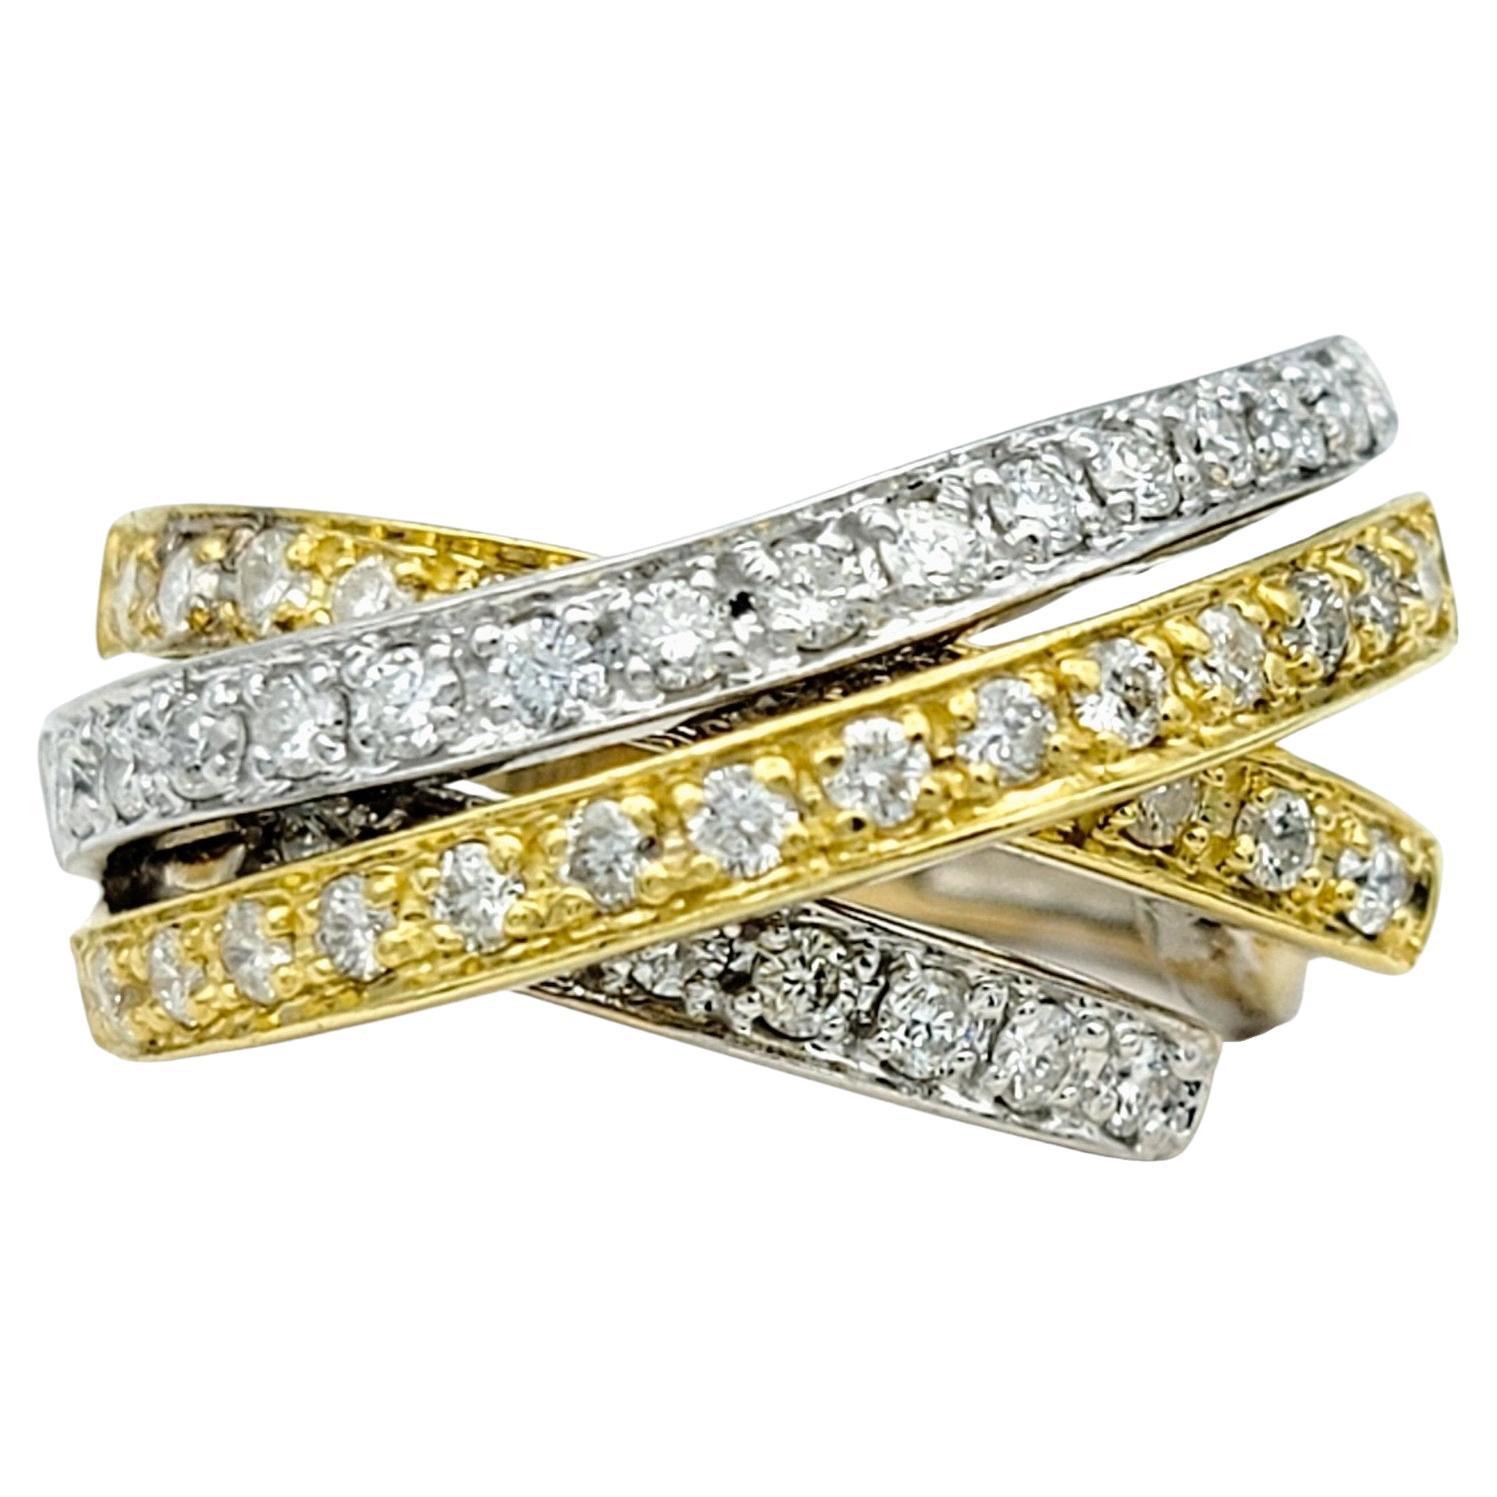 Sonia B. Multi Row Criss-Cross Diamond Band Ring Set in Two-Toned 18 Karat Gold For Sale